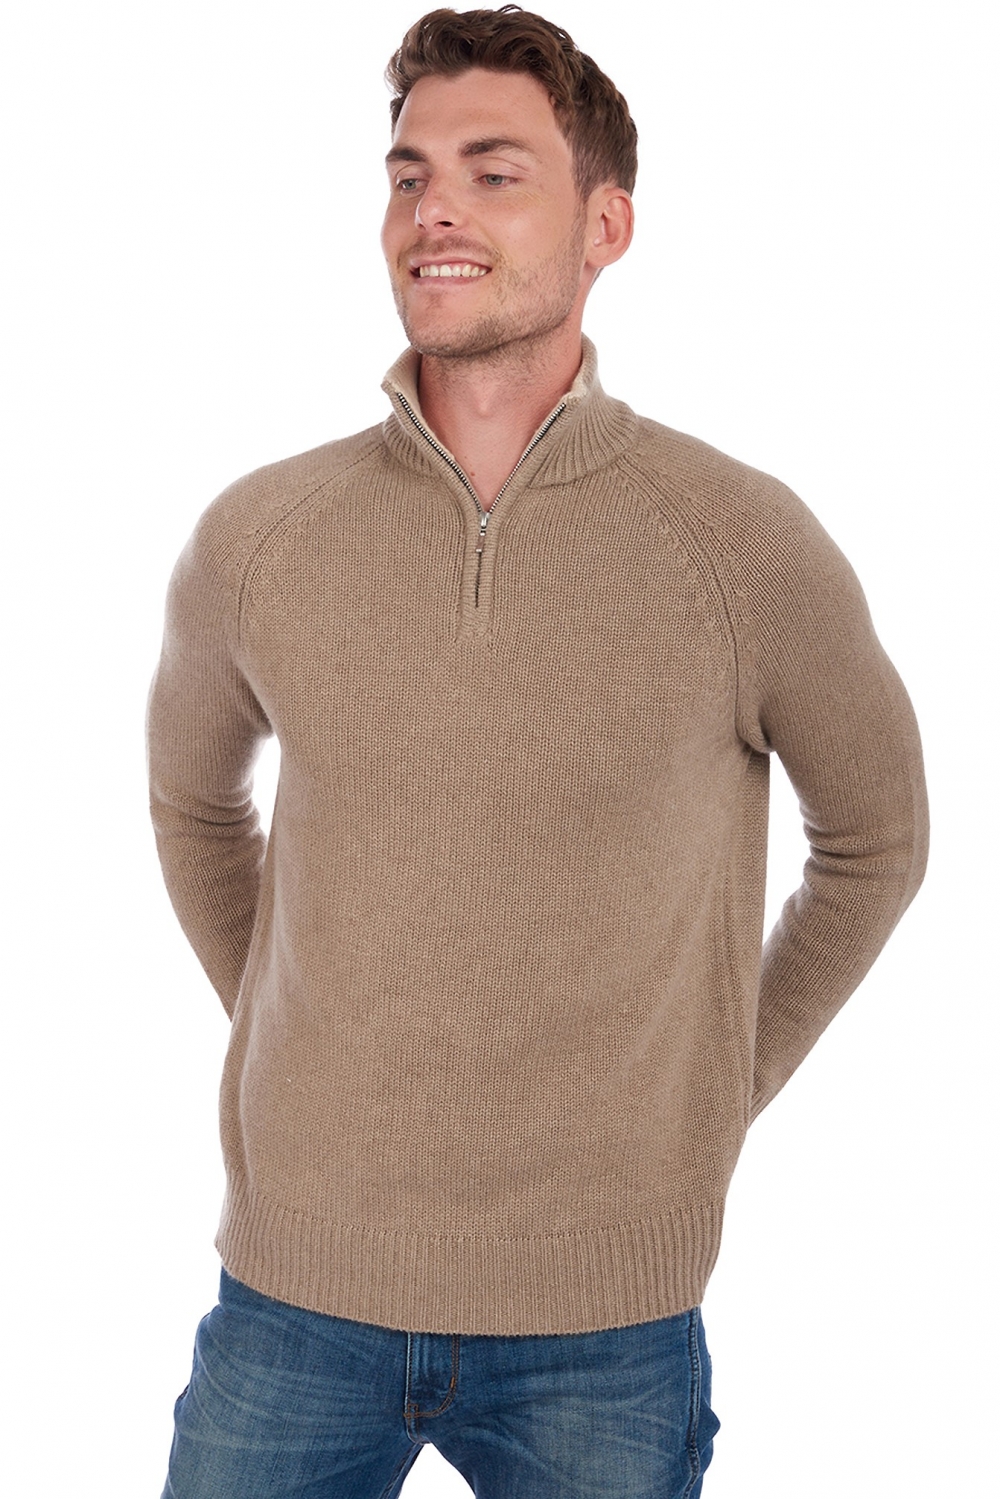 Cachemire pull homme angers natural brown natural beige 3xl